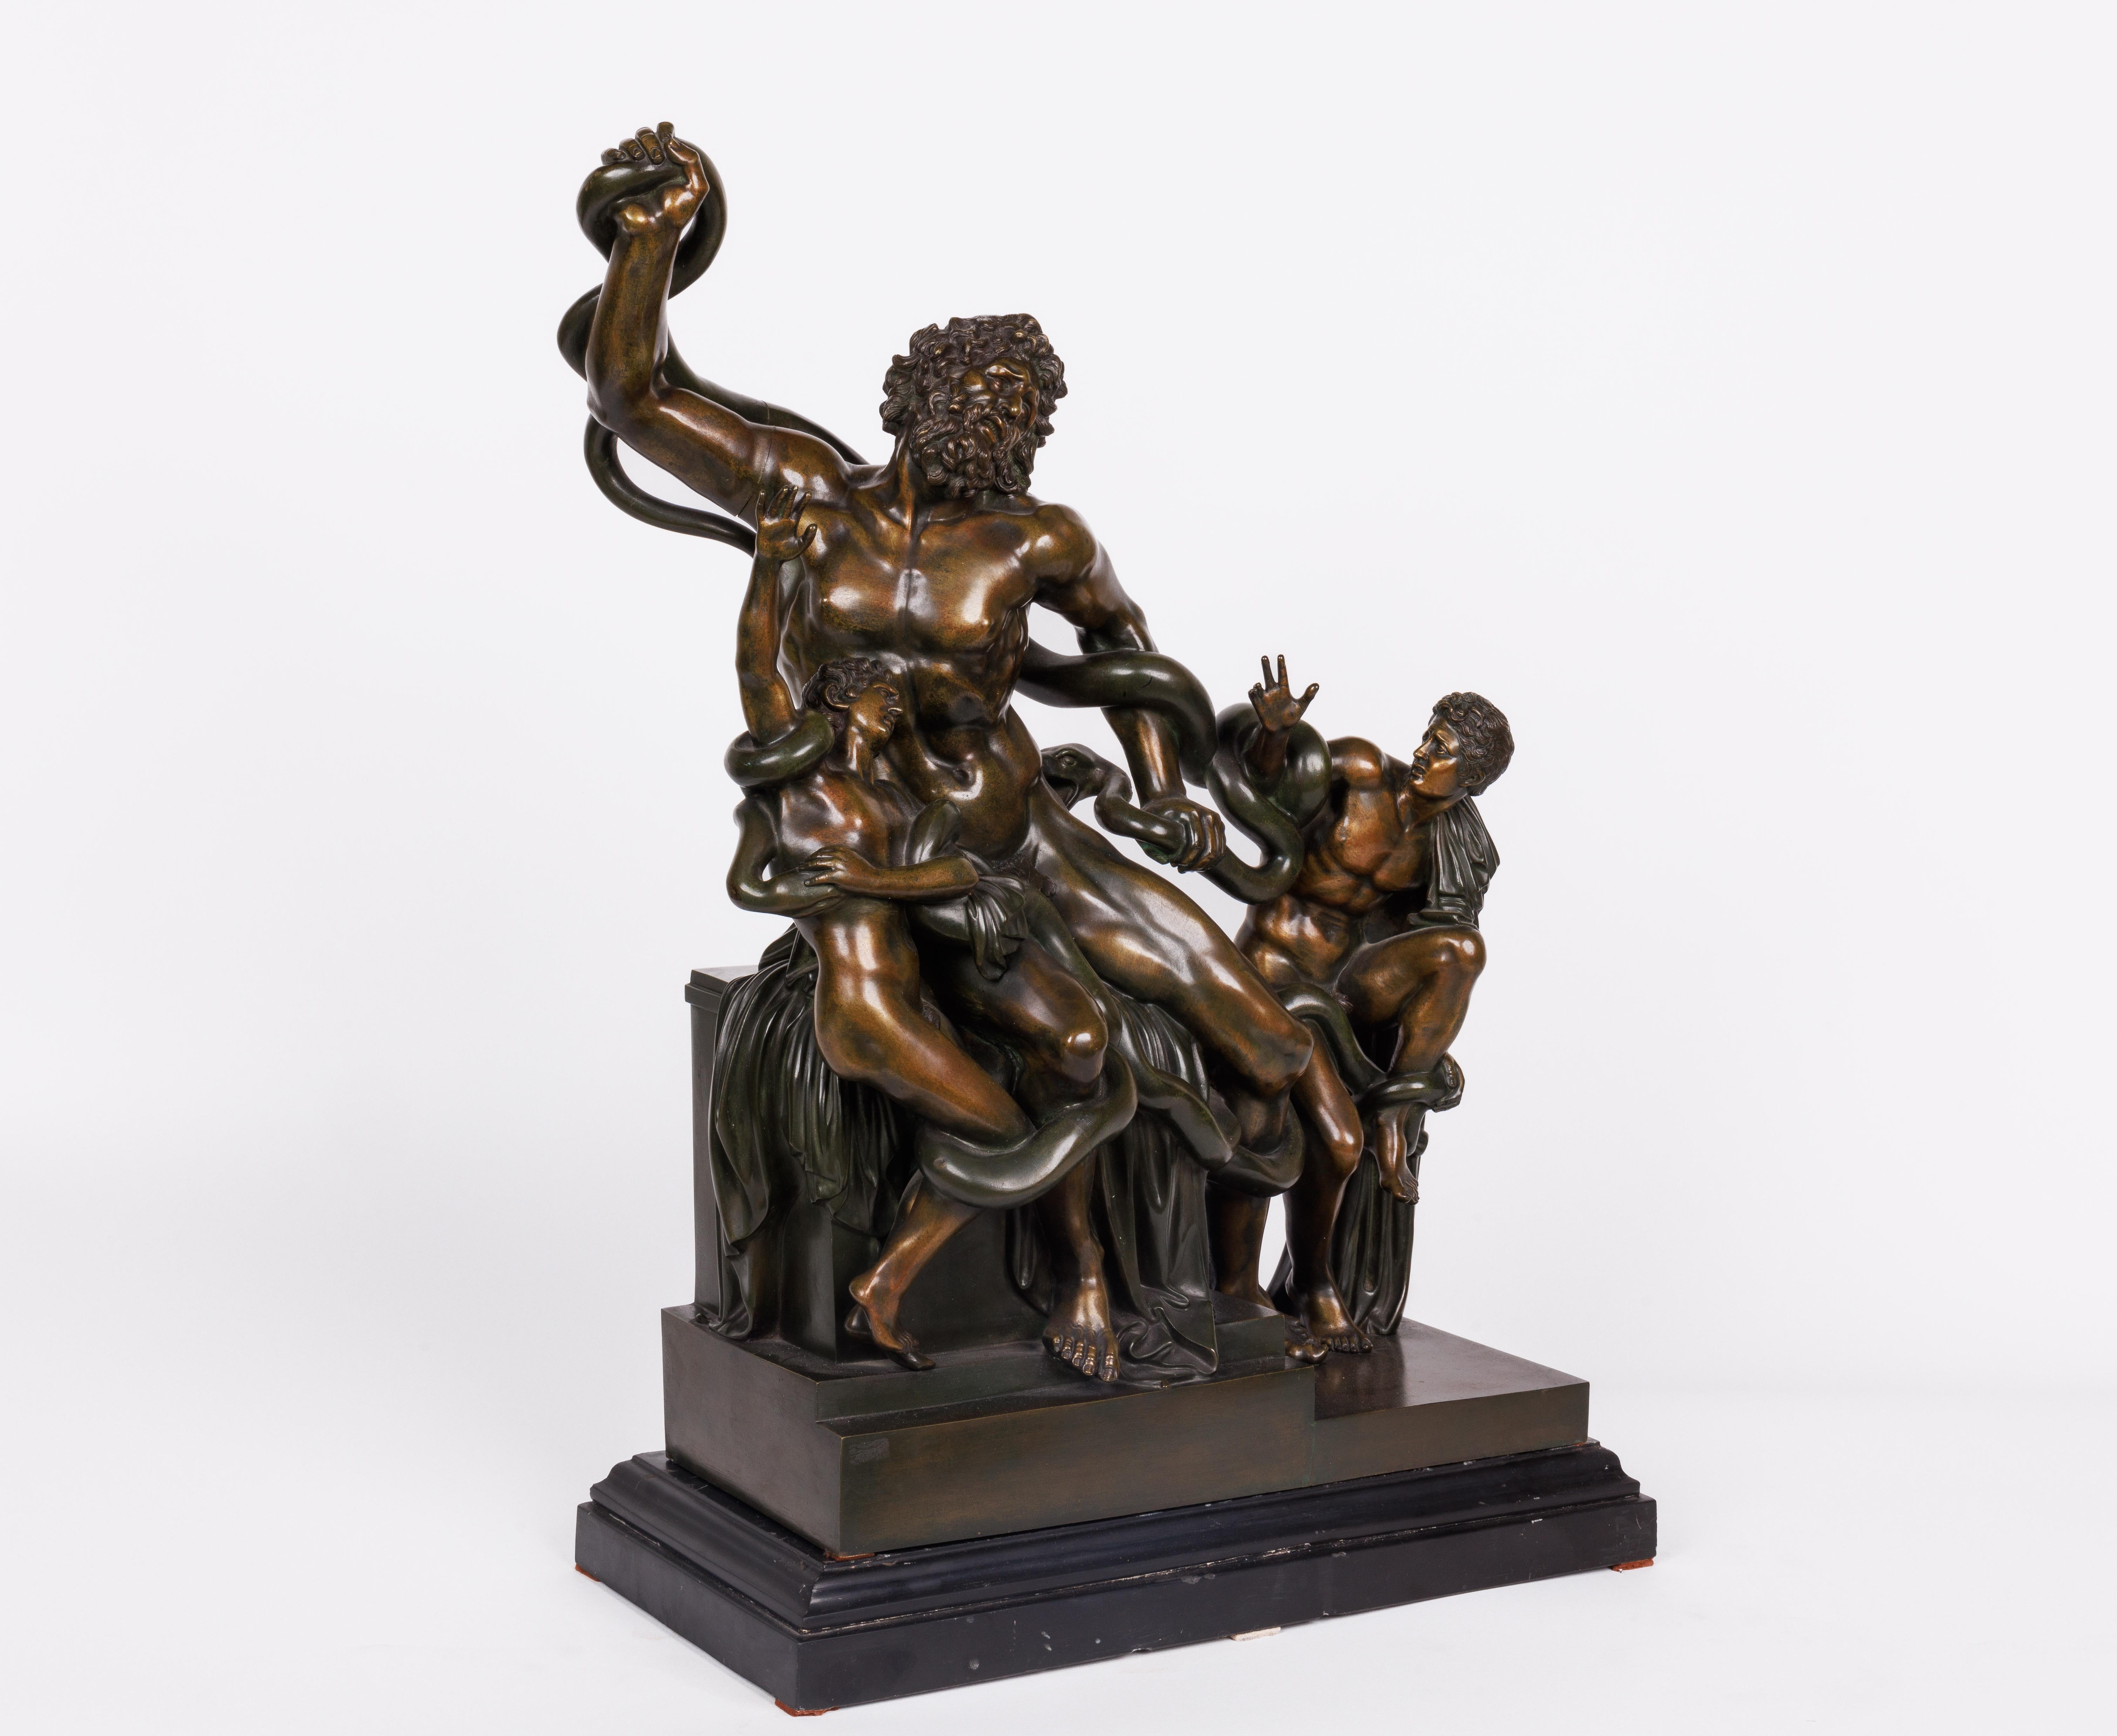 An Italian grand tour patinated bronze group sculpture of Laocoon and his sons, After the antique by Agesander of Rhodes, C. 1870

Very nice quality sculpture, sitting on a black slate base. We did not find any marks on this sculpture.

Good